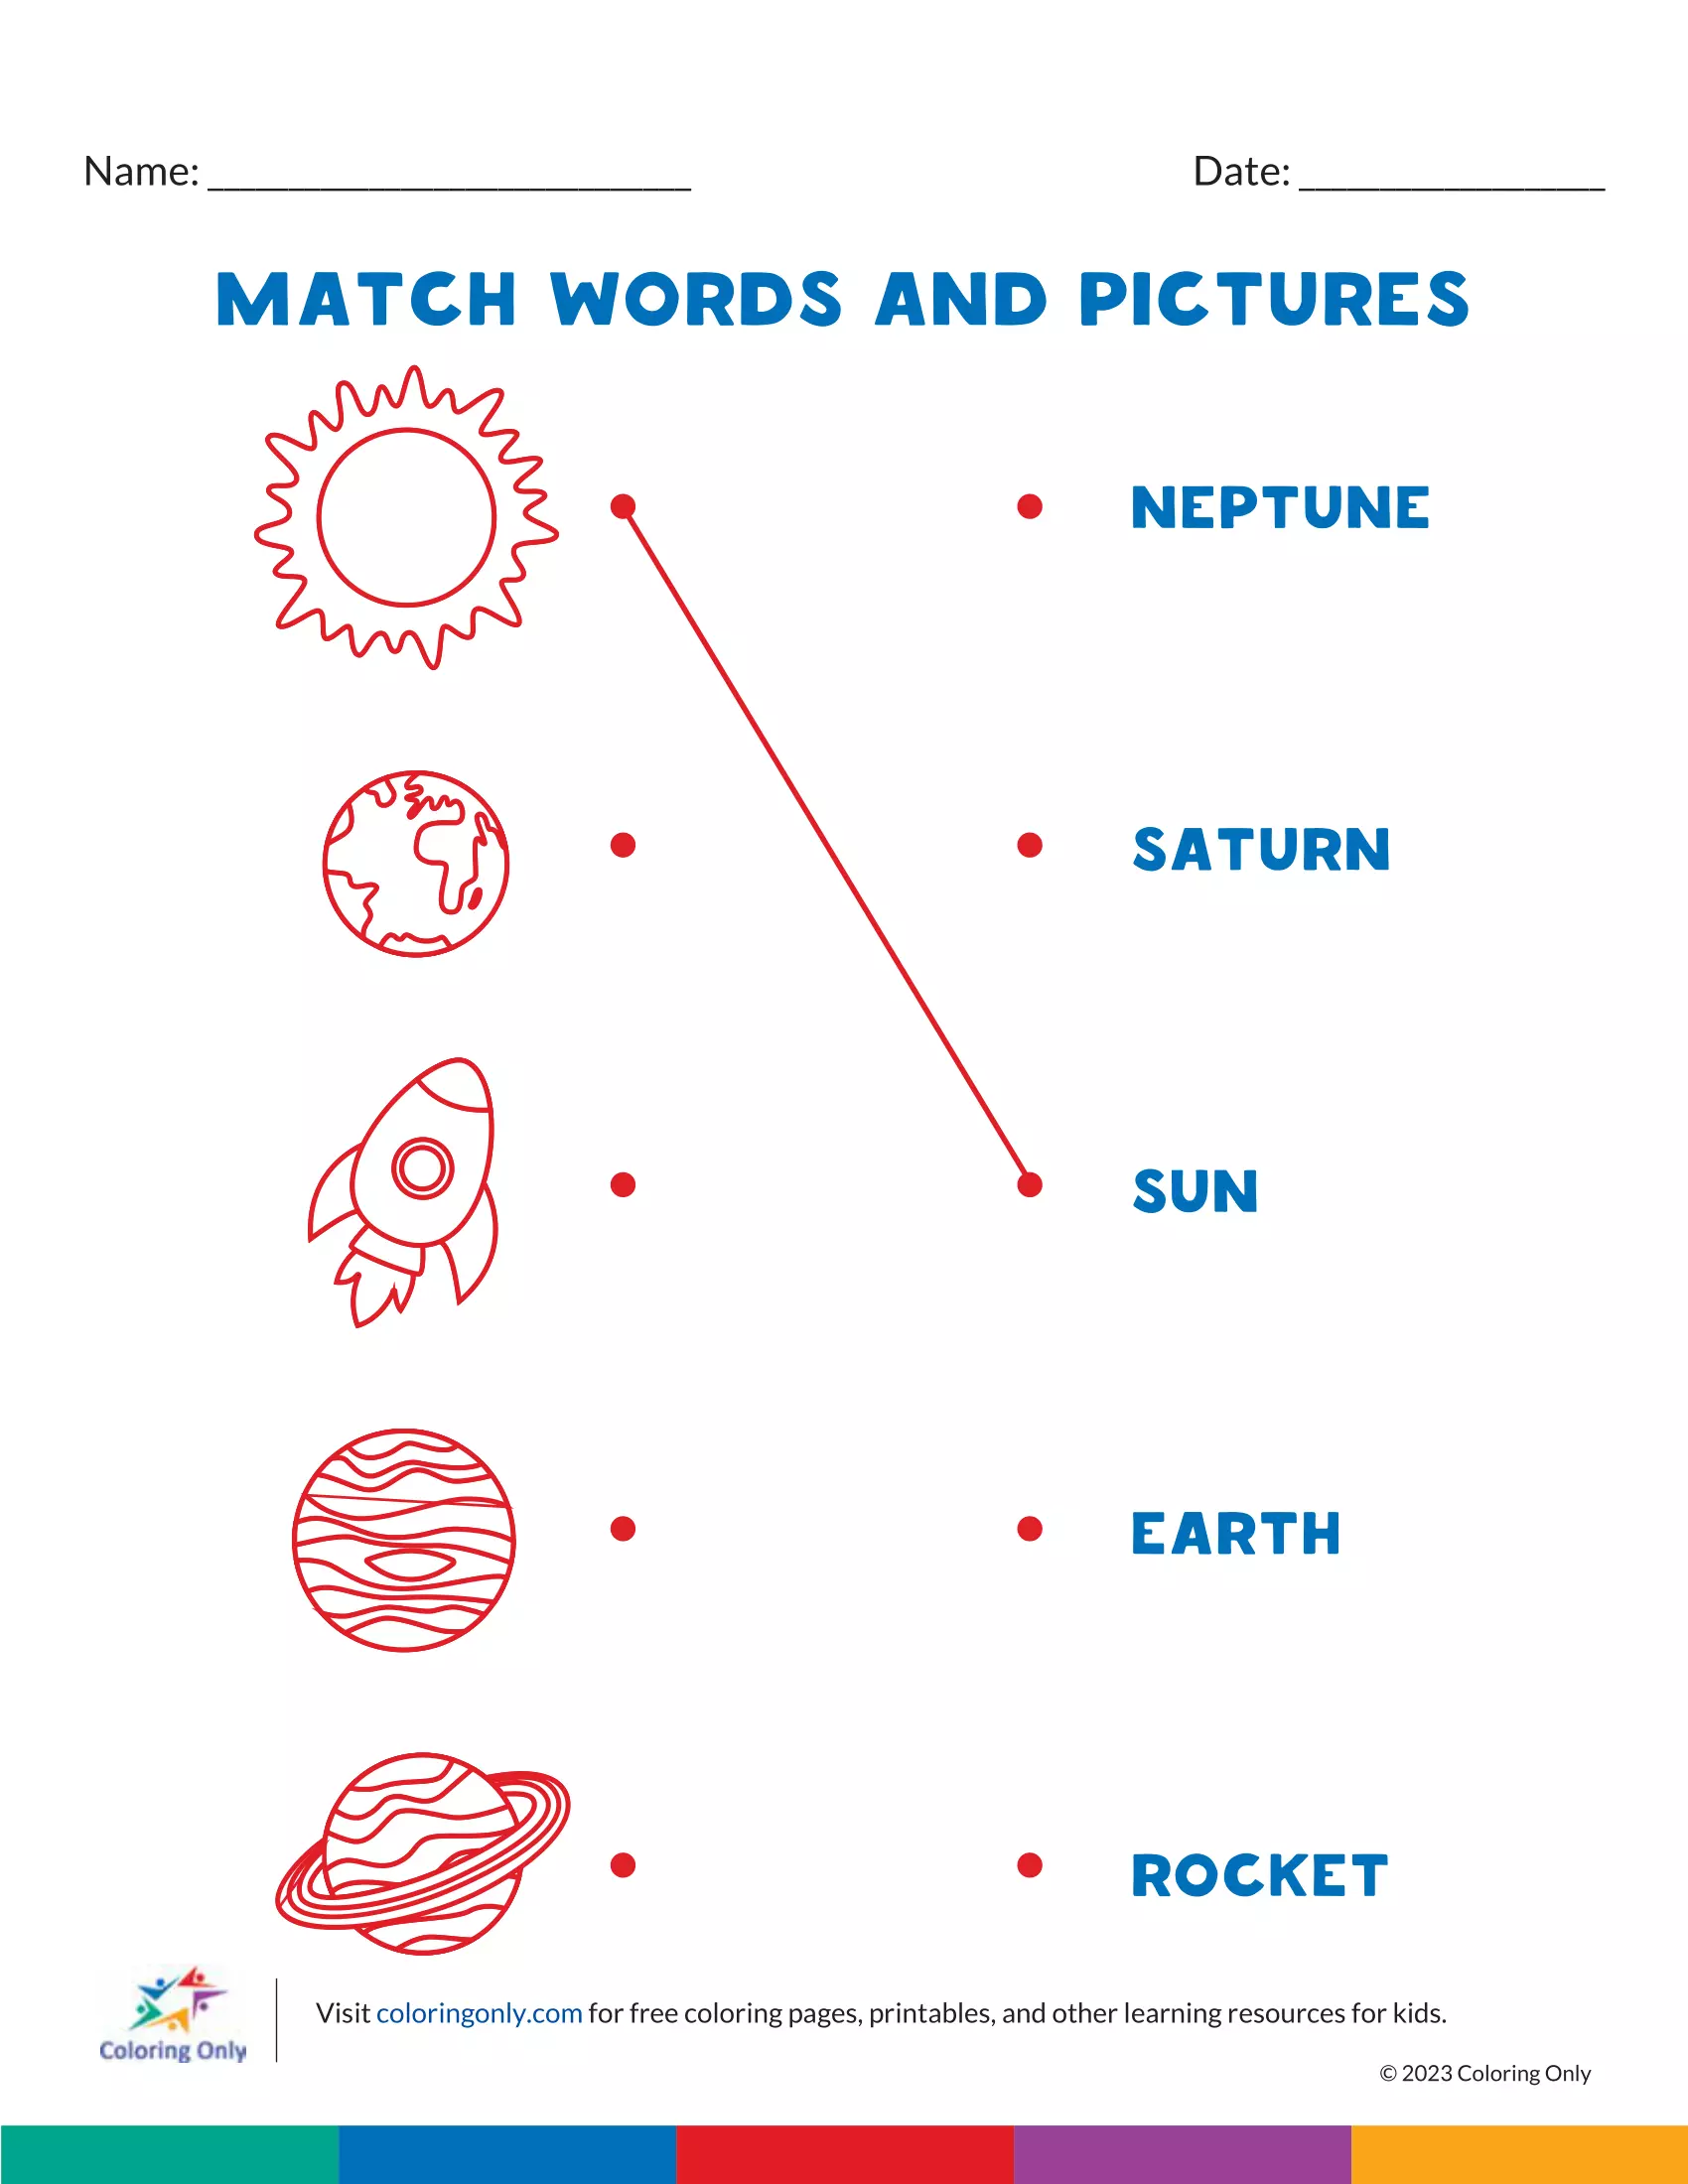 Match Words and Pictures